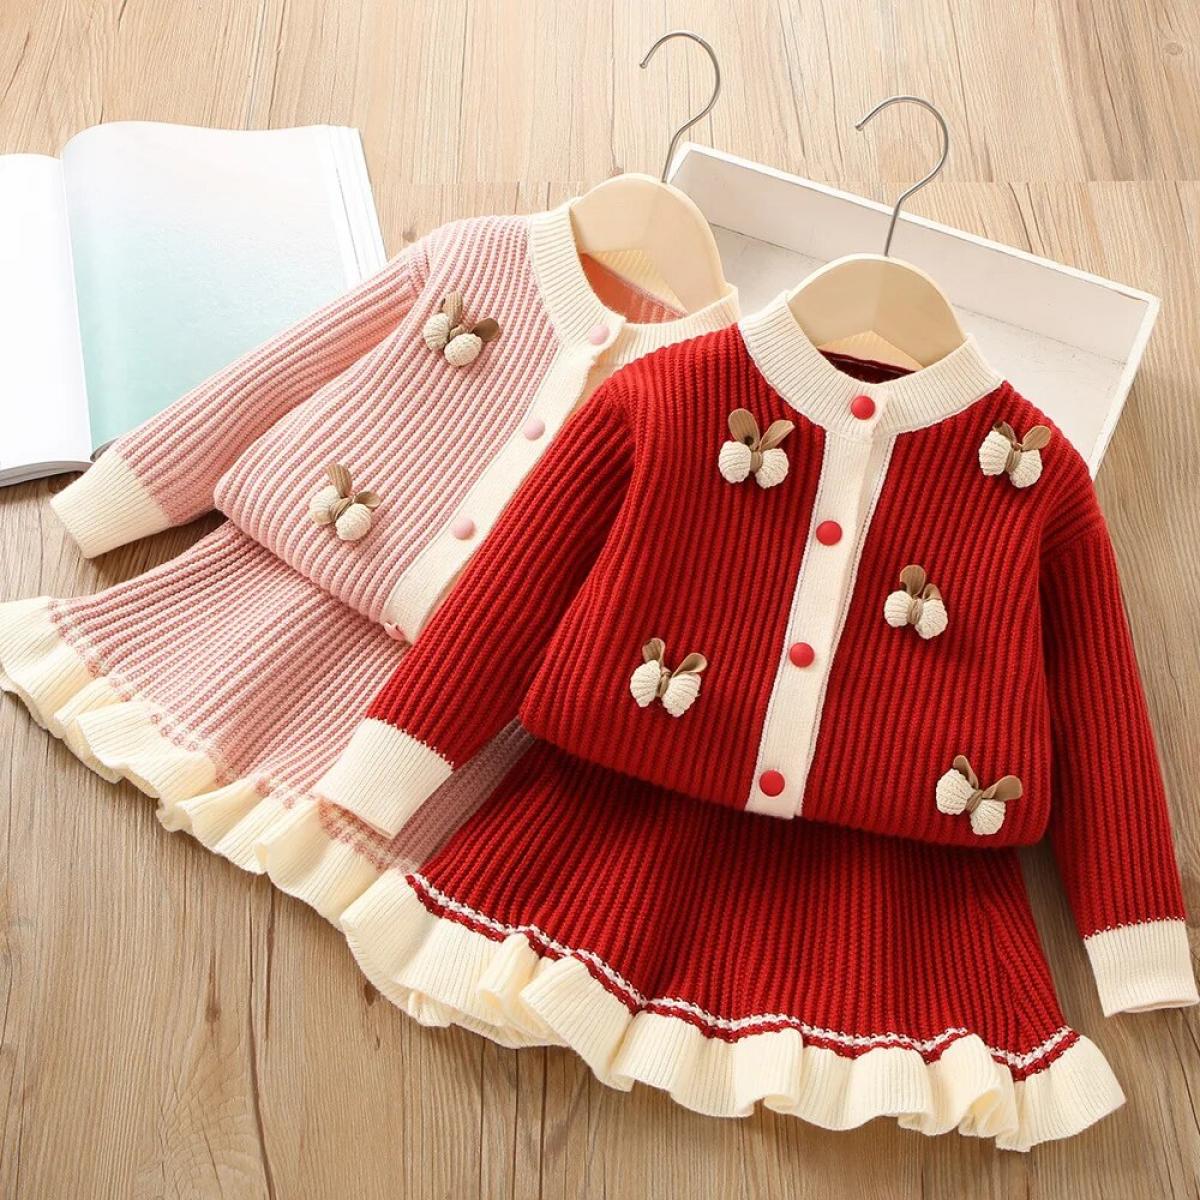 New Girls' Fashionable Dress  Cute Red First Year Dress Christmas Party Clothes 2 8 Year Old Autumn Clothes